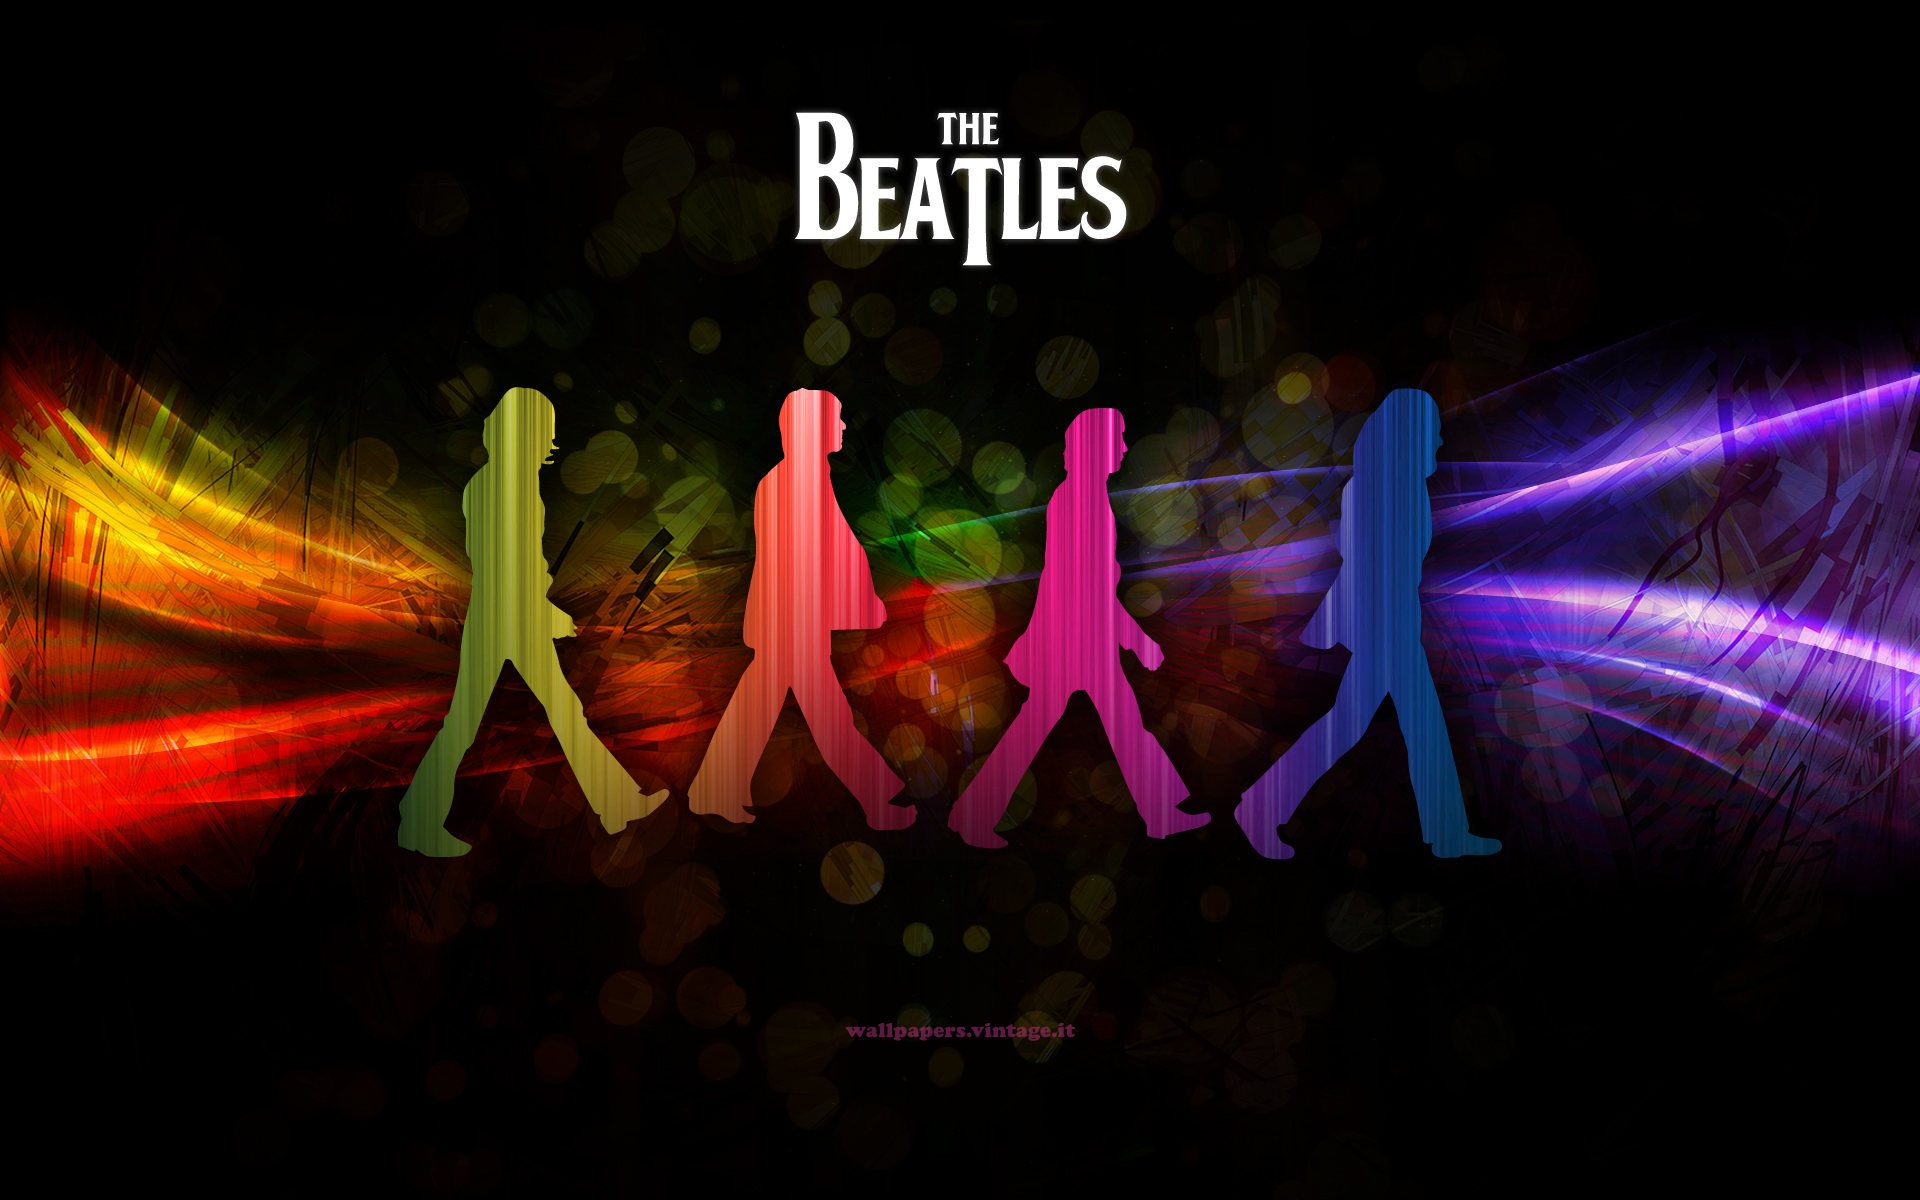 The Beatles Wallpaper And Image Pictures Photos